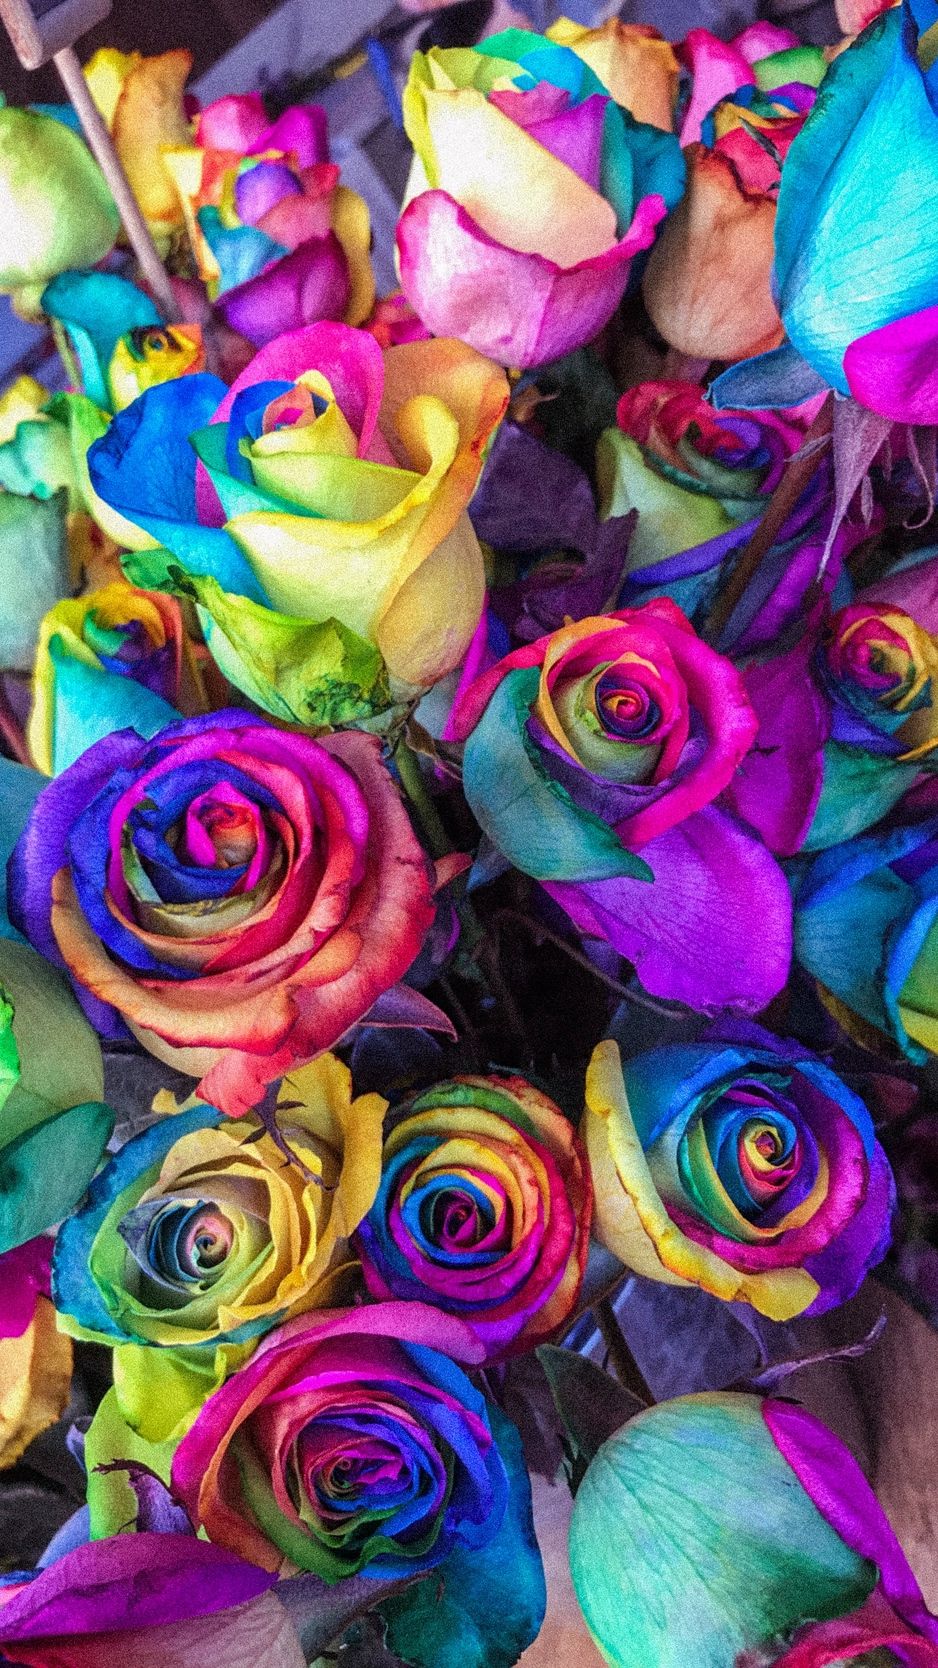 Download wallpaper 938x1668 roses, colorful, bouquet, colourful